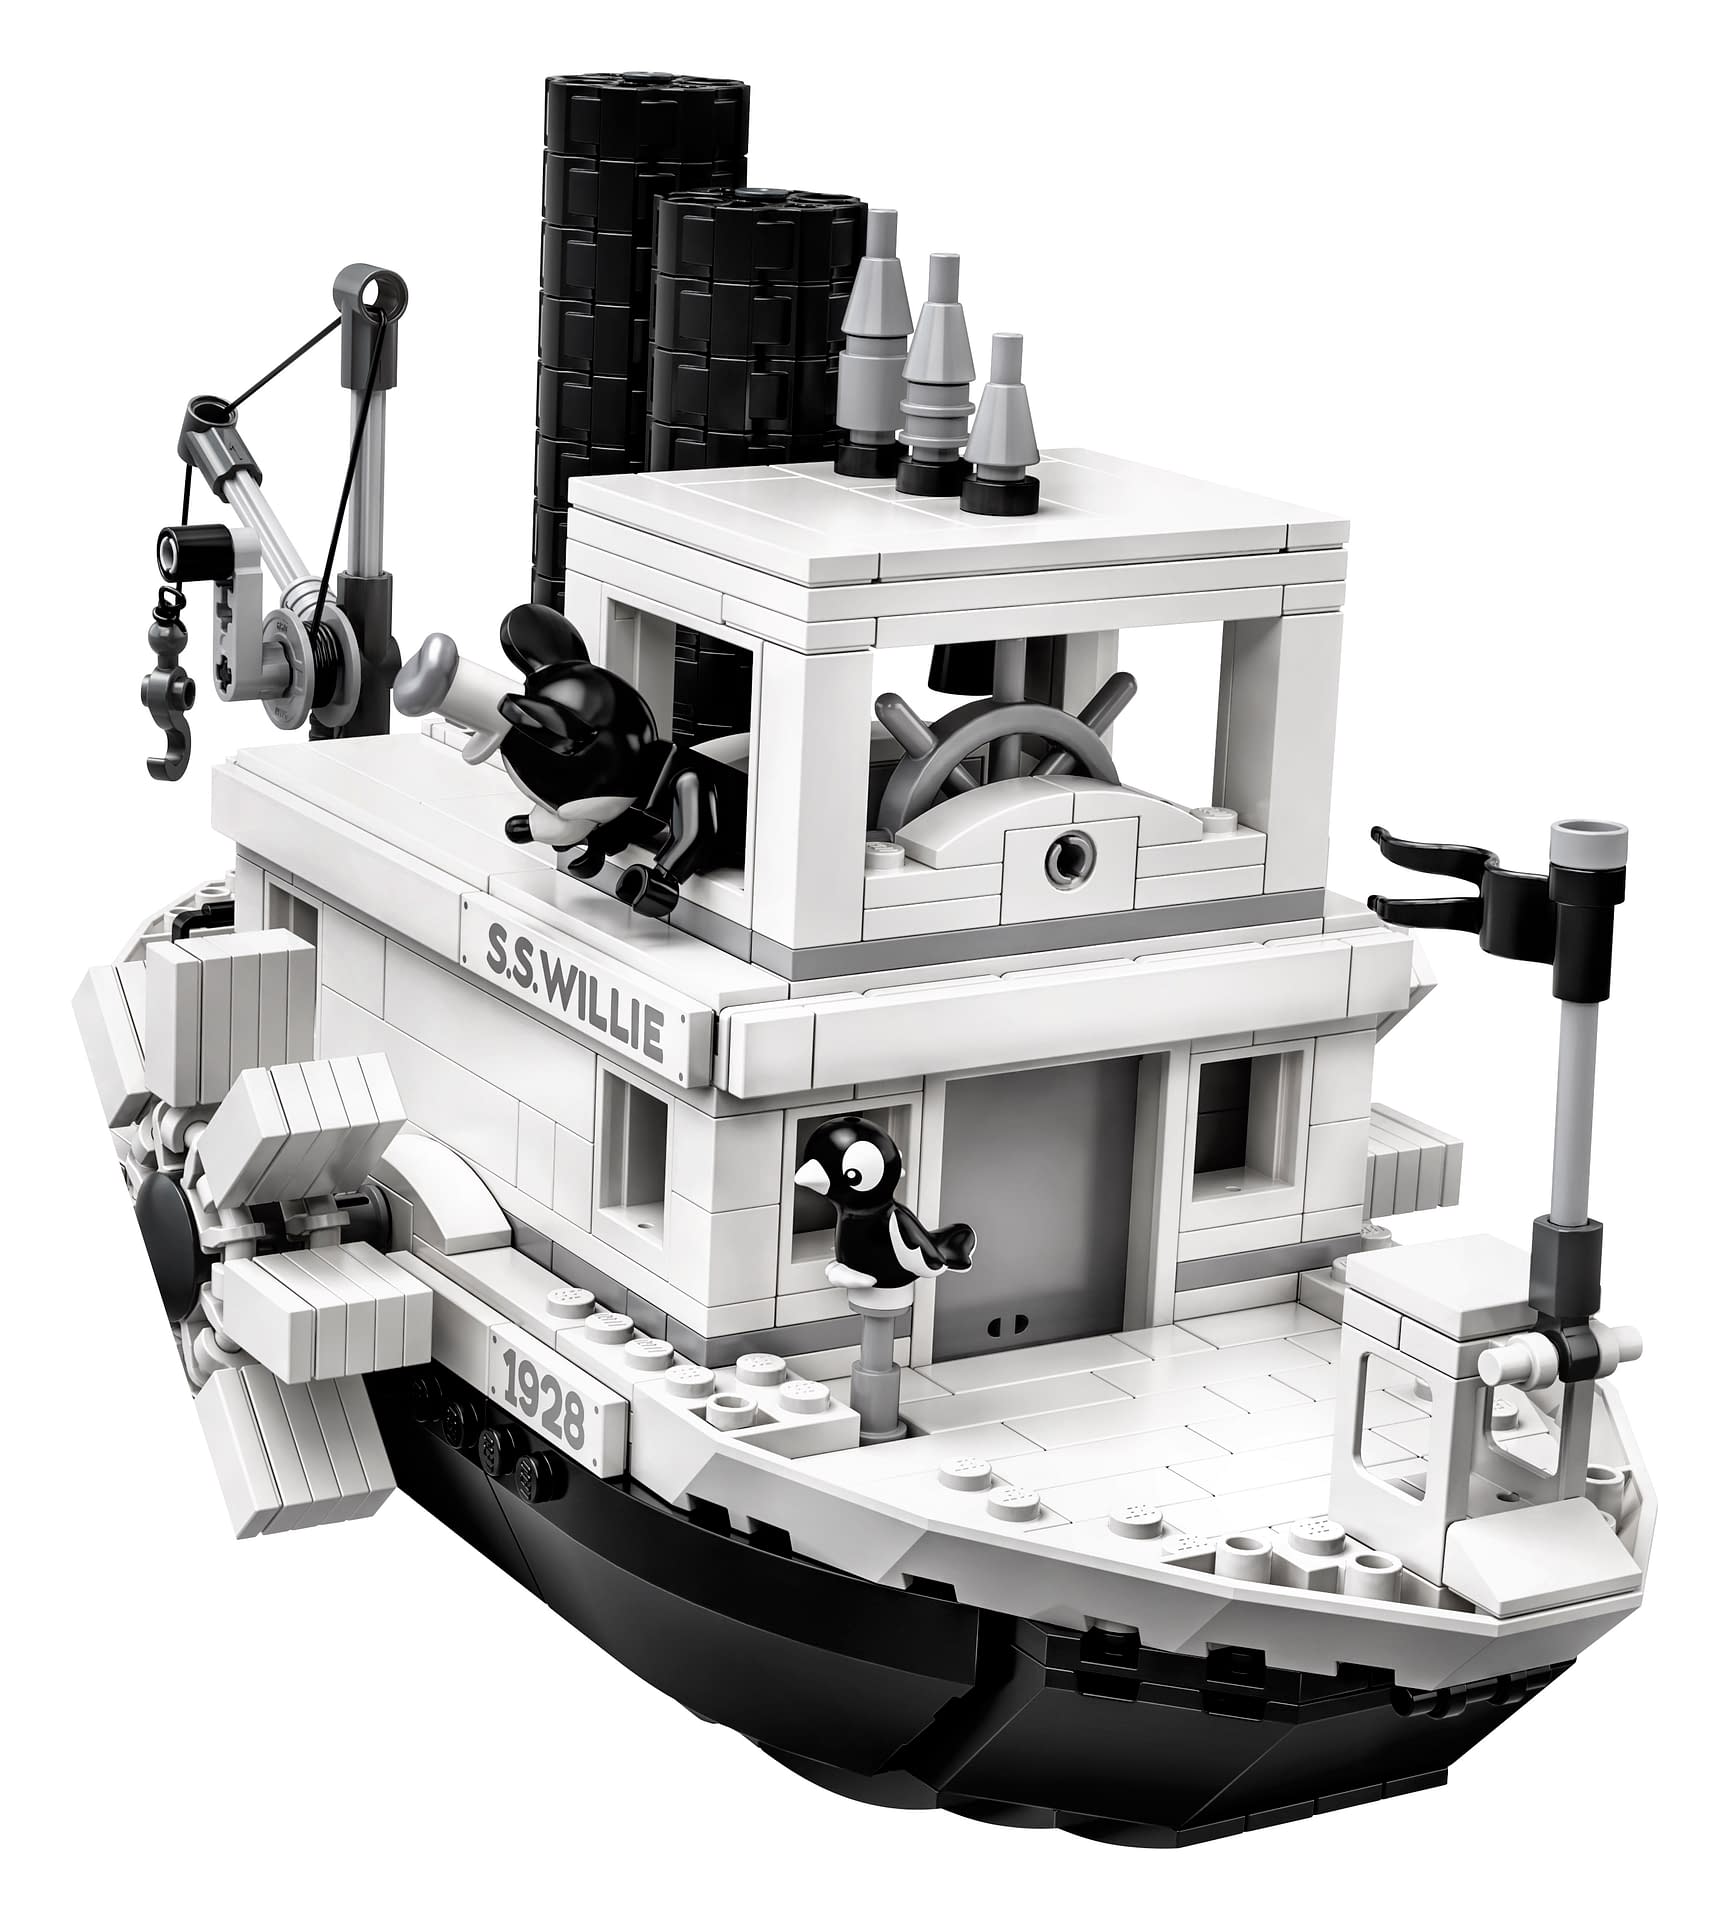 LEGO Ideas Steamboat Willie Mickey and Minnie Mouse Set 8